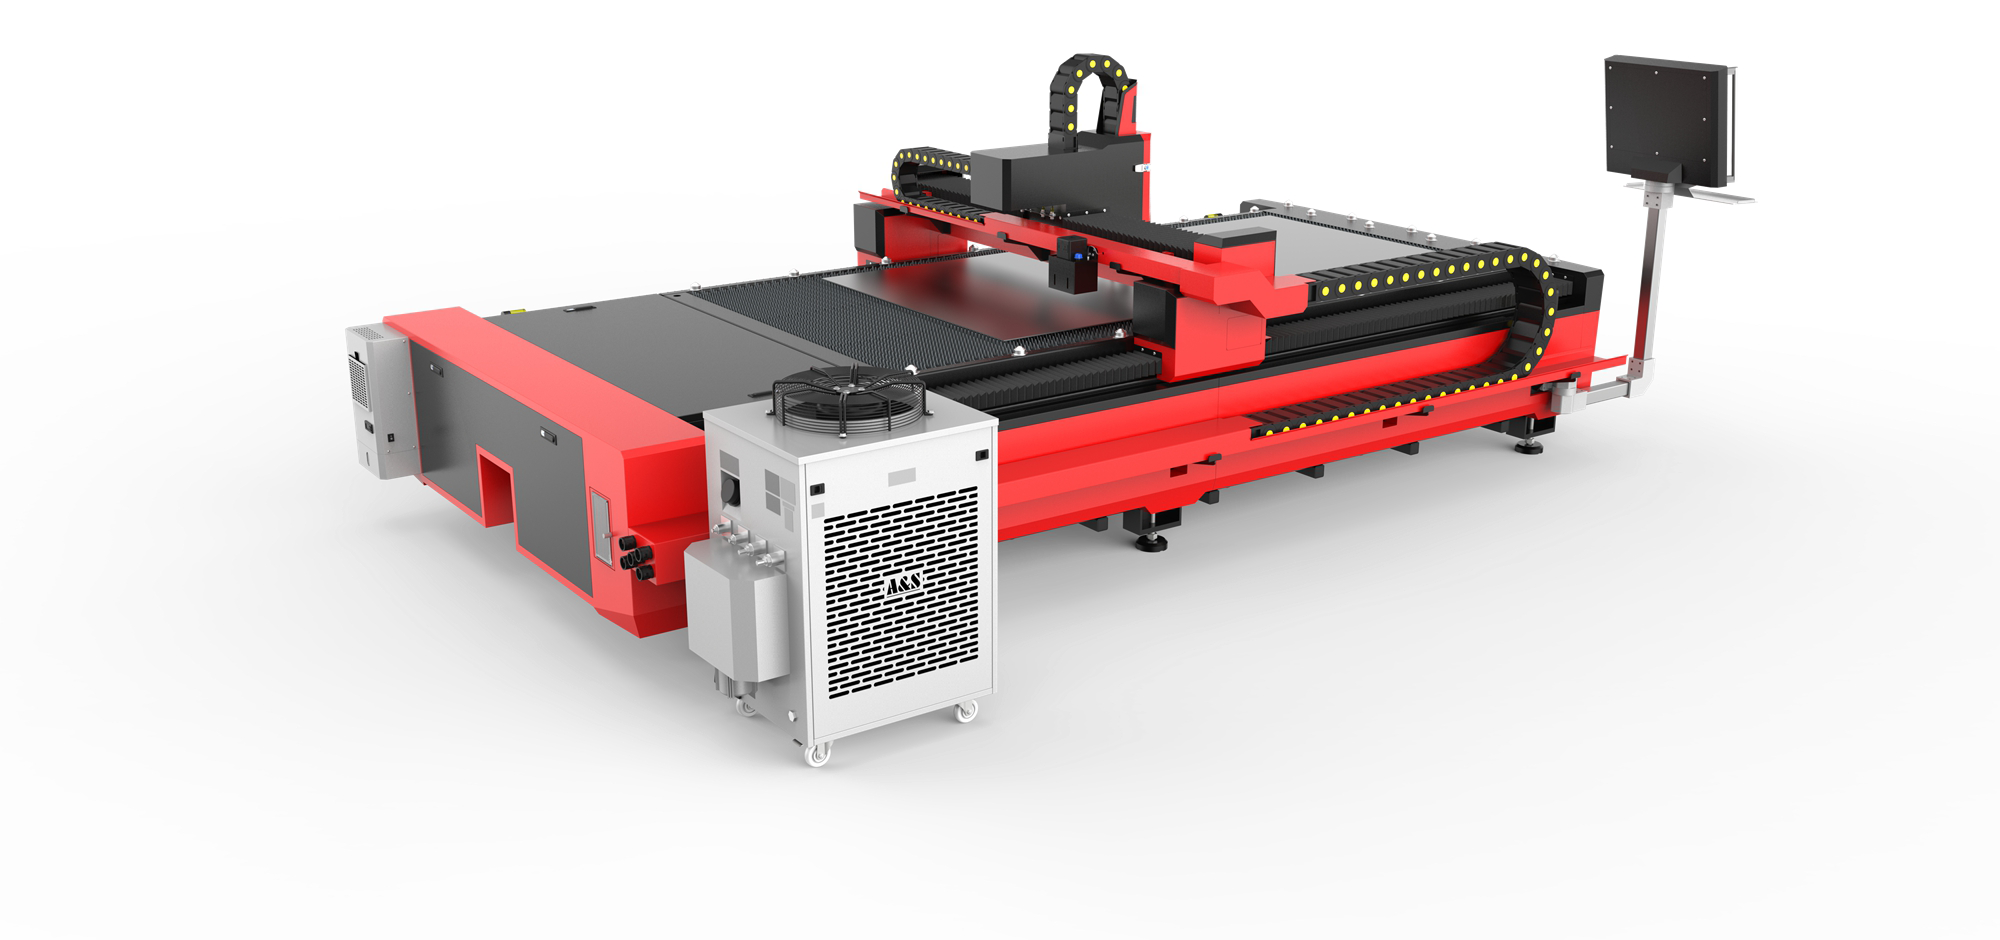 6000W Fiber Laser Cutting Machine Specially for Aluminum Curtain Wall Processing Featured Image